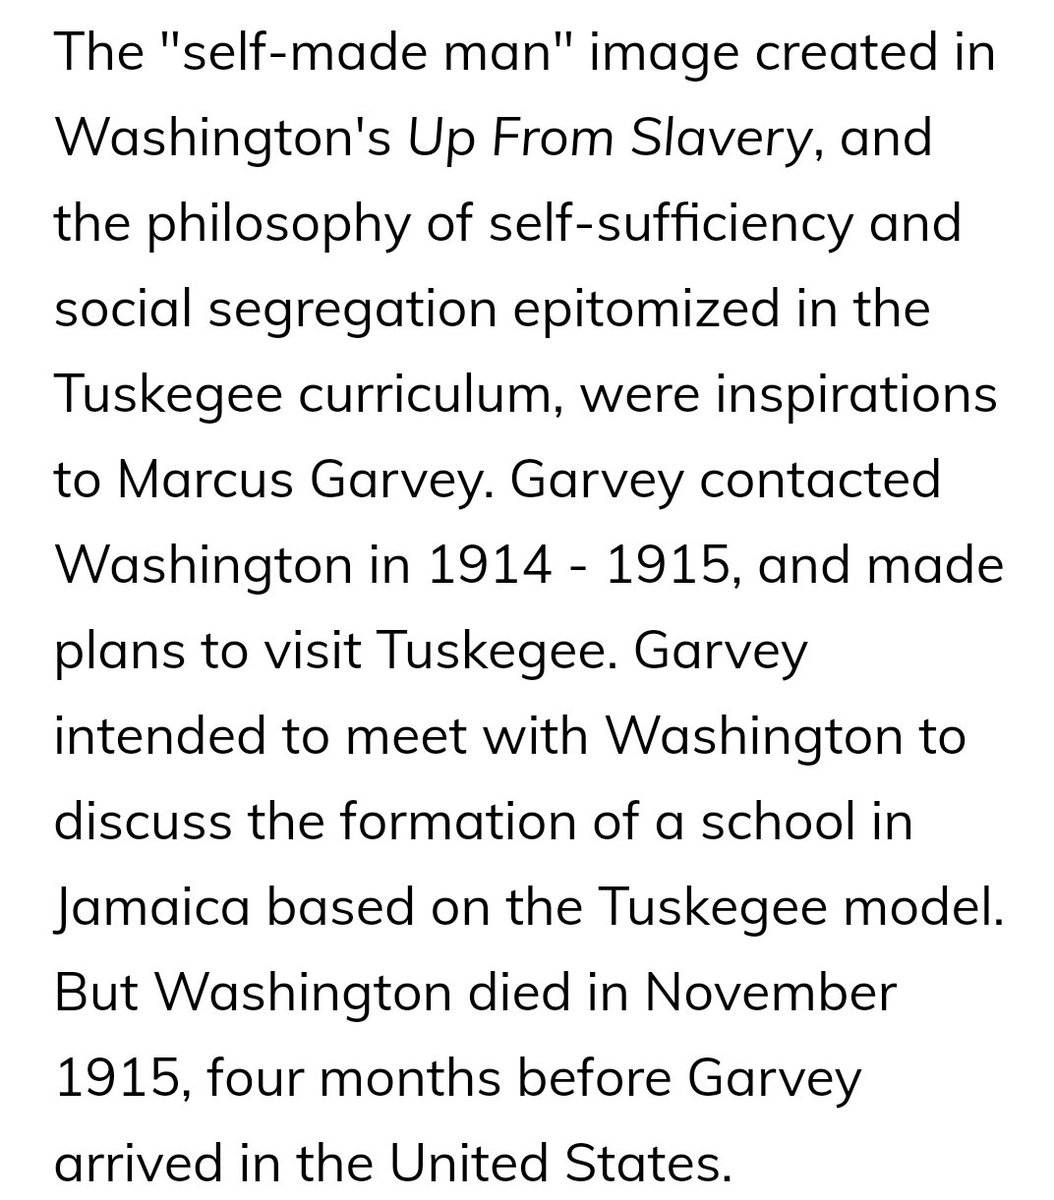 Next up is Marcus Garvey. Garvey was partly inspired by ADOS Booker T Washington's method of self-determination for ADOS, and even had a plan for establishing an institution similar to Tuskegee during the early UNIA days.